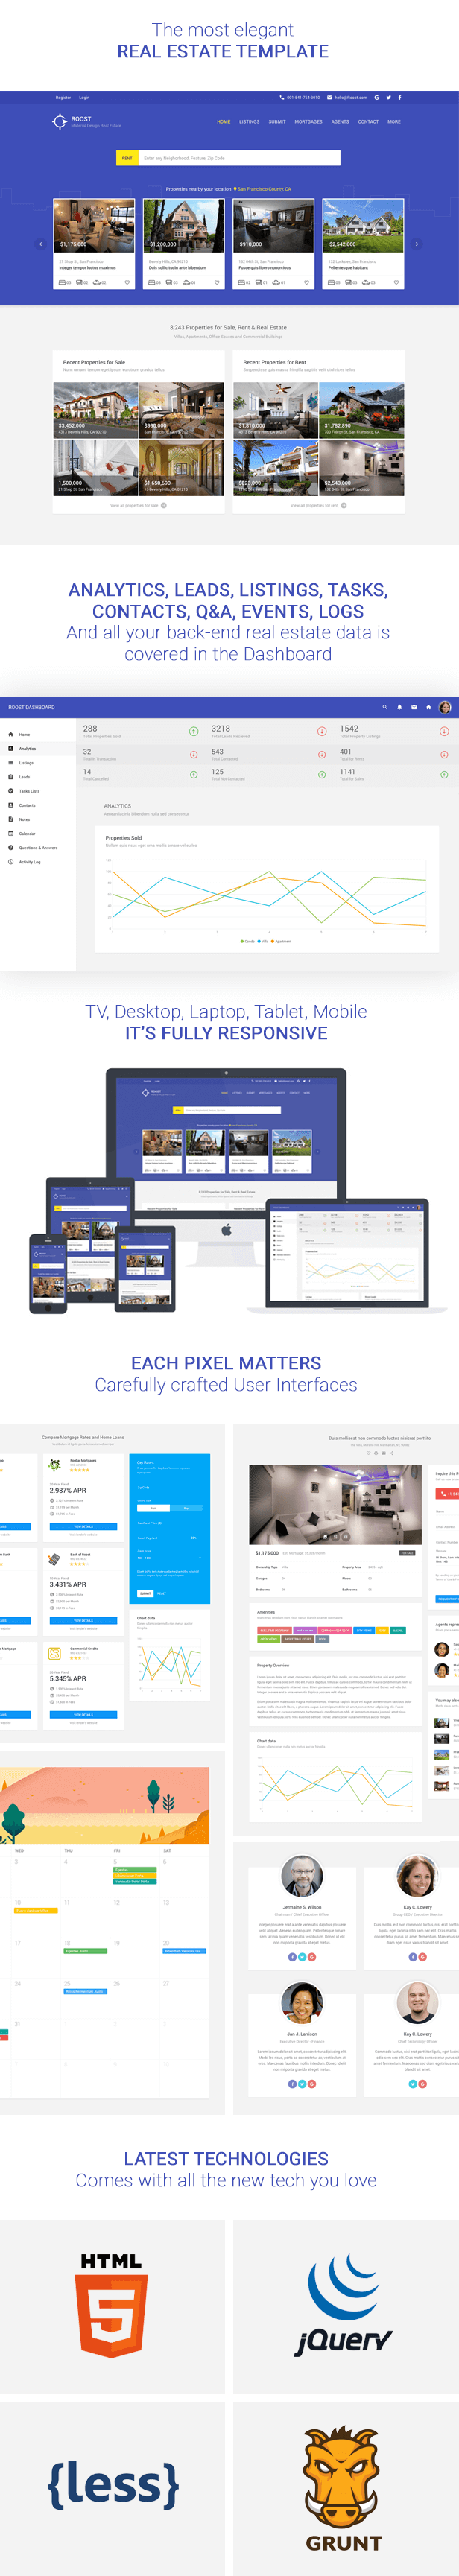 Roost Material Design Real Estate + Dashboard - 1